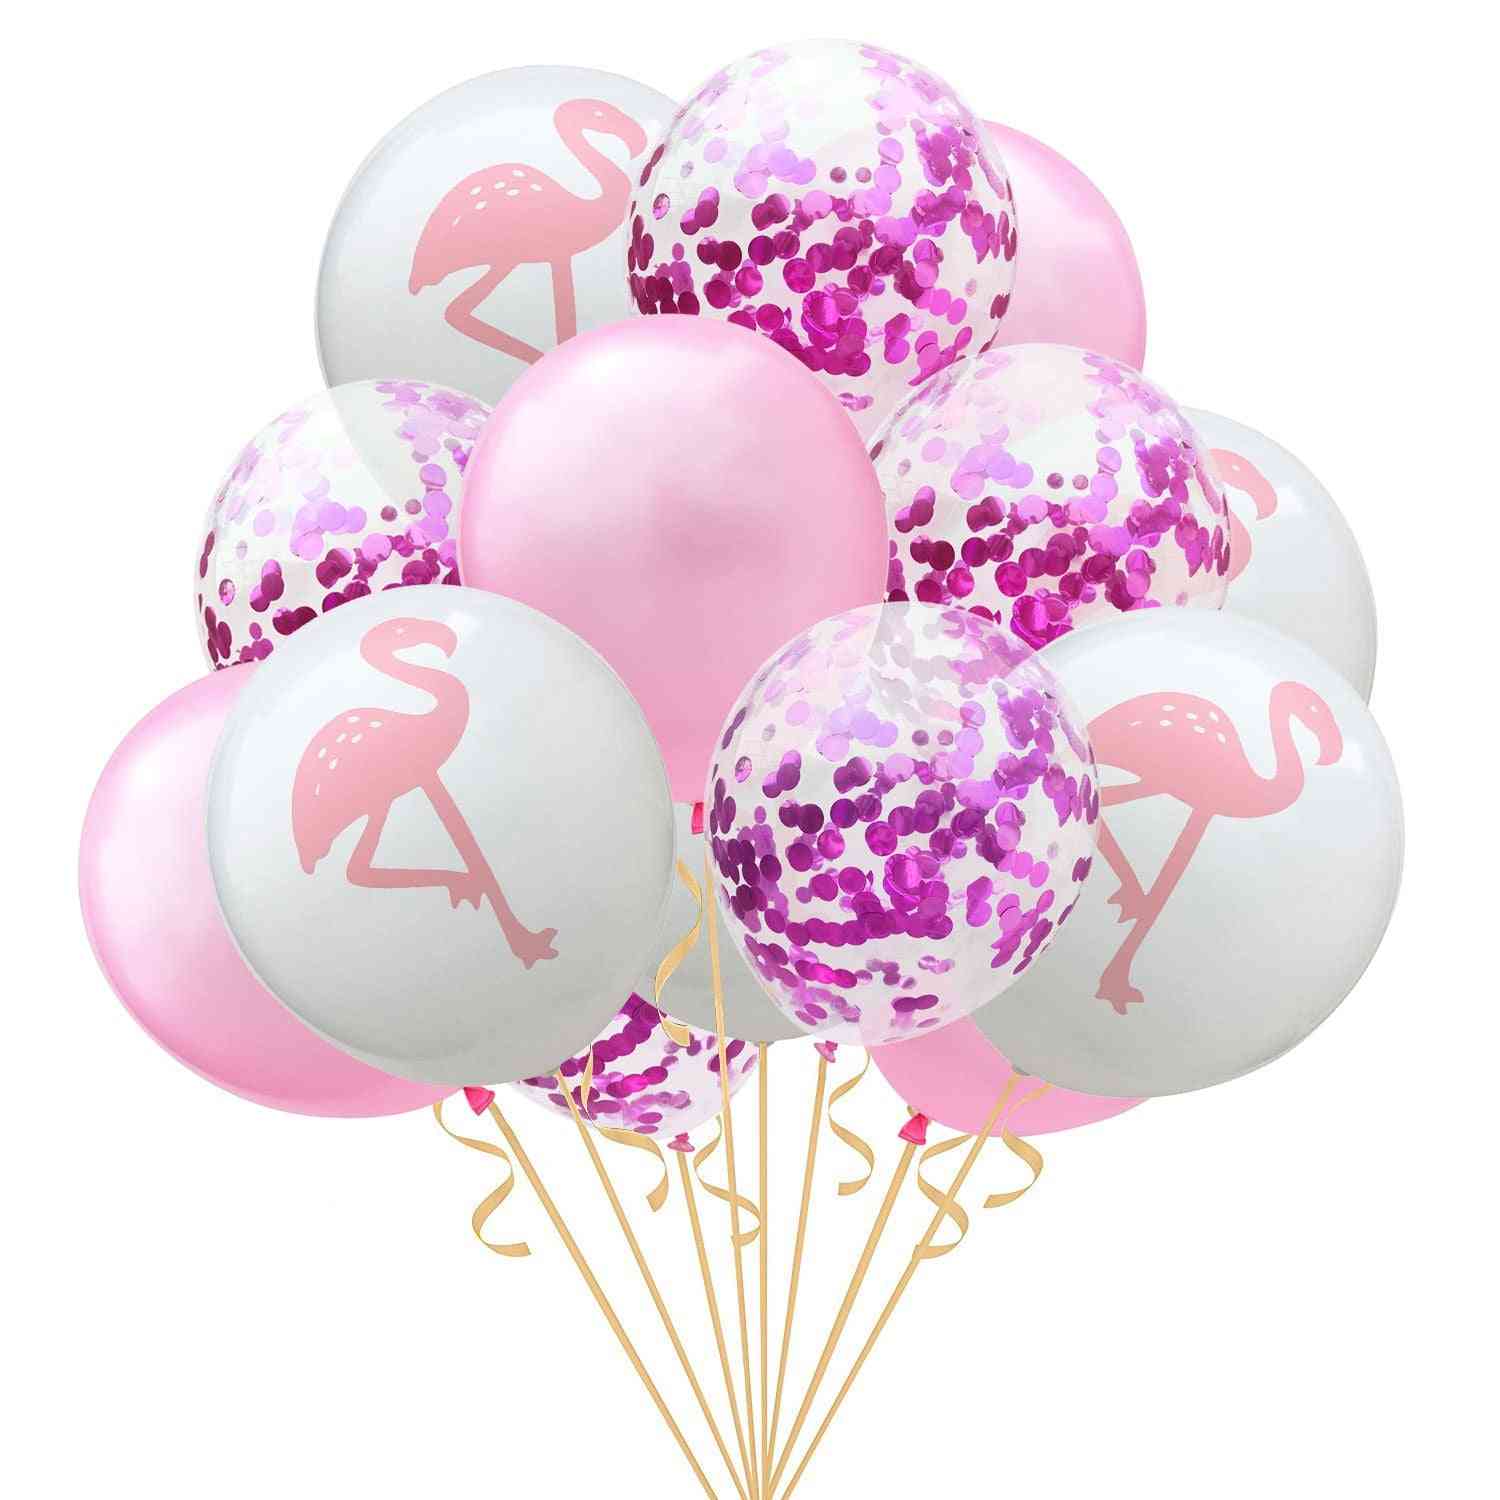 Inflatable Birthday Balloons - Decorated Confetti Party Flamingo, Pineapple And Leaf